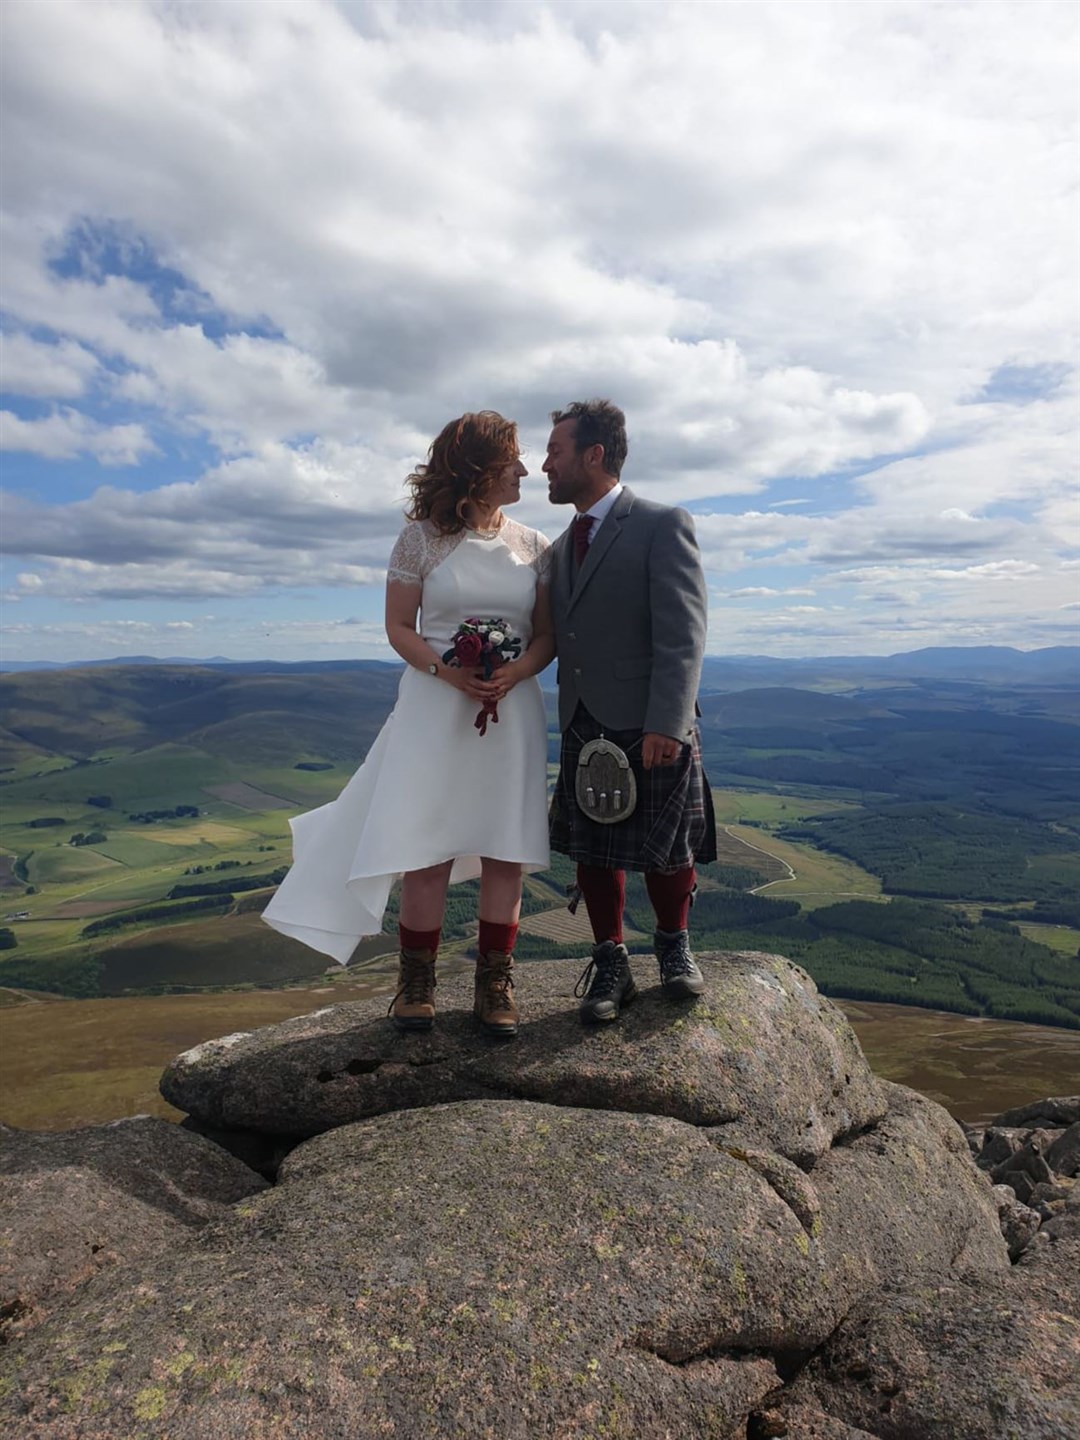 Summit to celebrate. Ally Troon and Sarah Law celebrate their wedding at the top of Ben Rinnes.